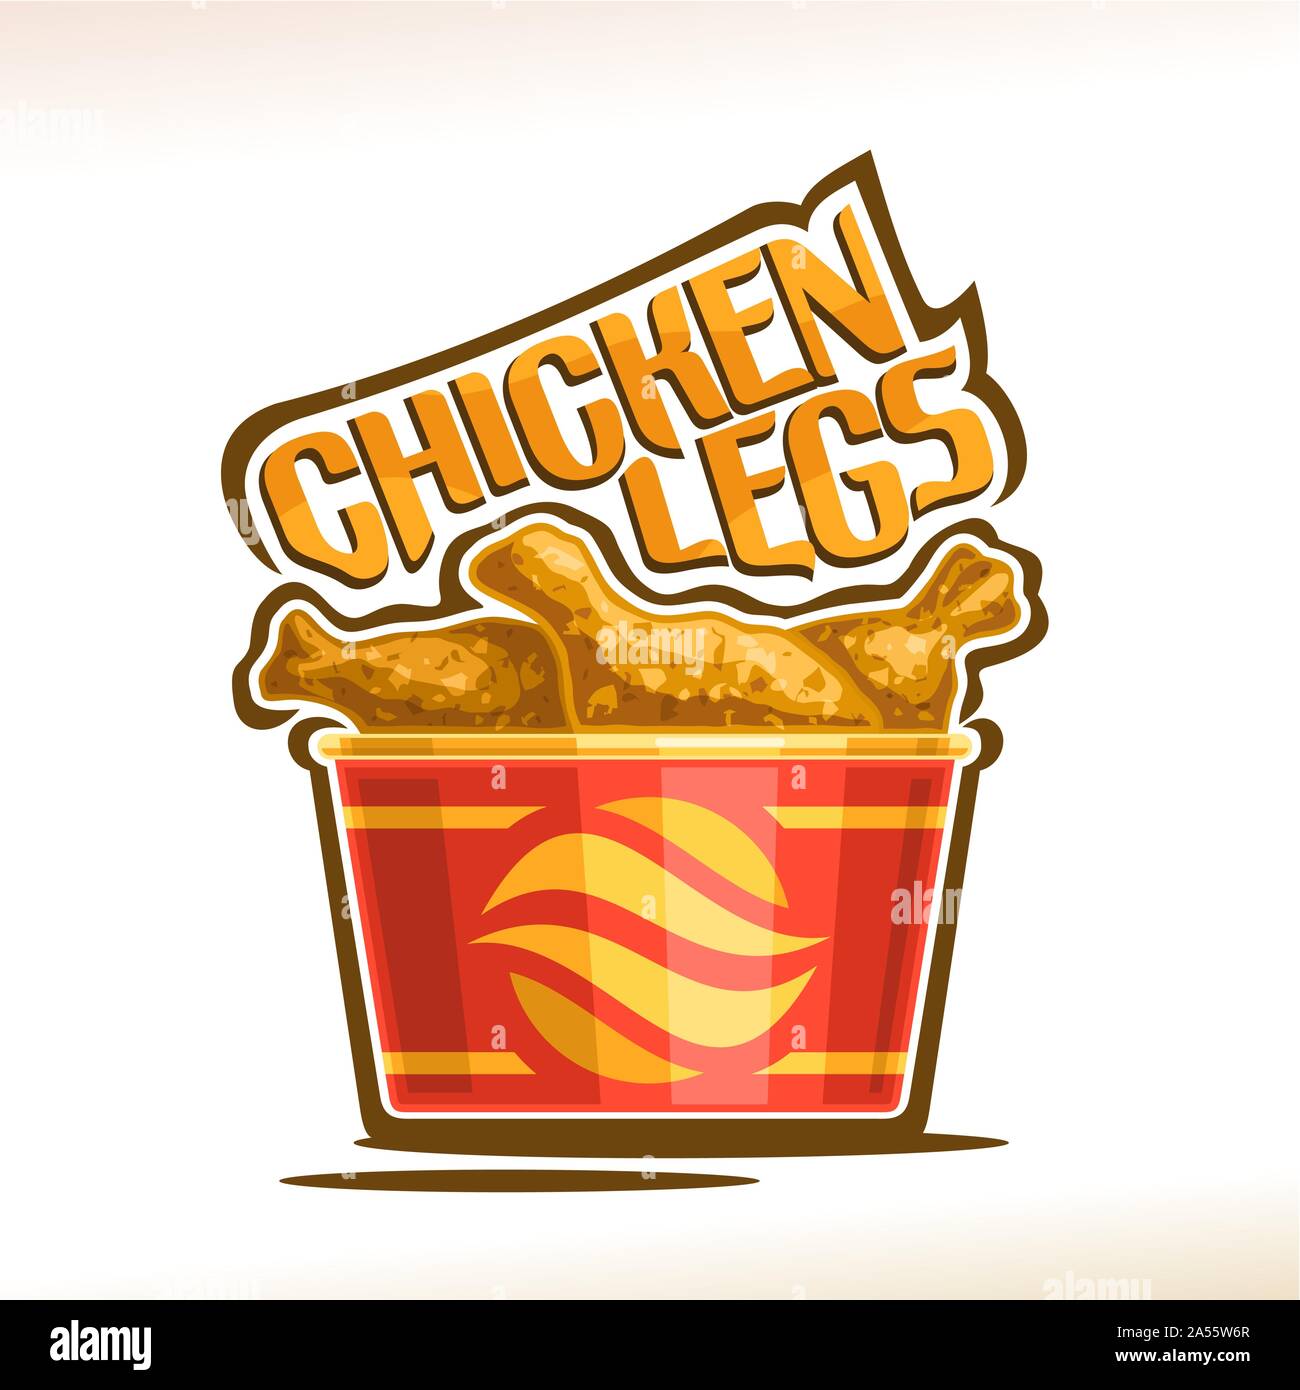 Vector logo for crispy Chicken Legs, poster with fatty barbecue drumsticks in red carton mini bucket, original typeface for words chicken legs, illust Stock Vector